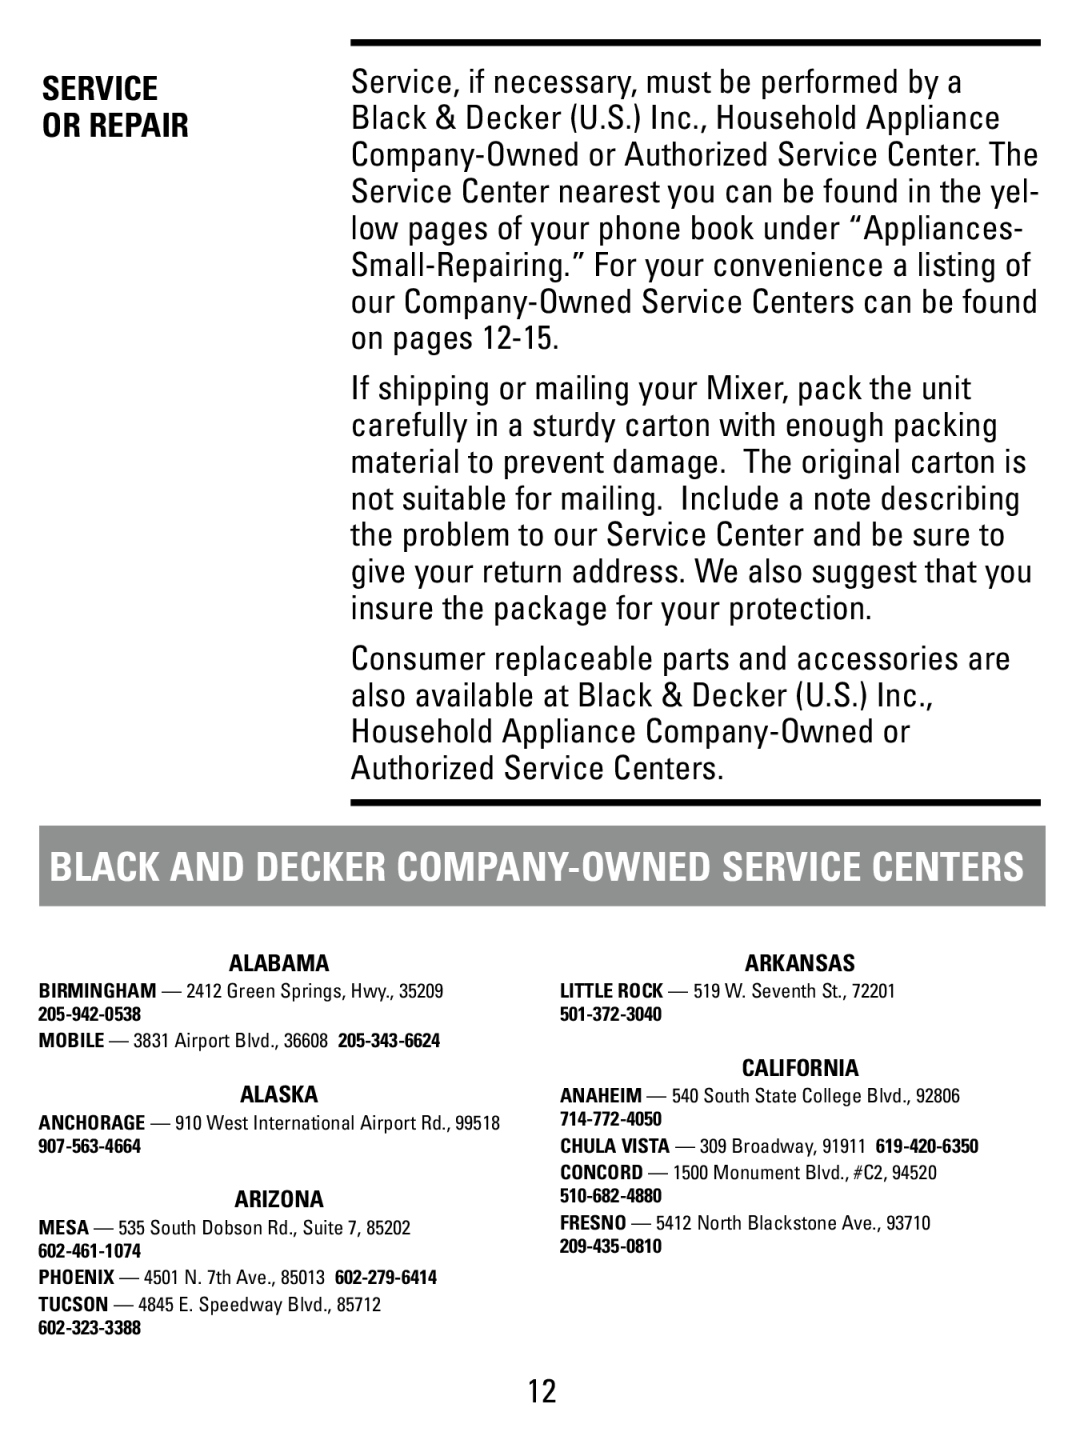 Black & Decker M175W manual Black And Decker Company-Ownedservice Centers, Service Or Repair 